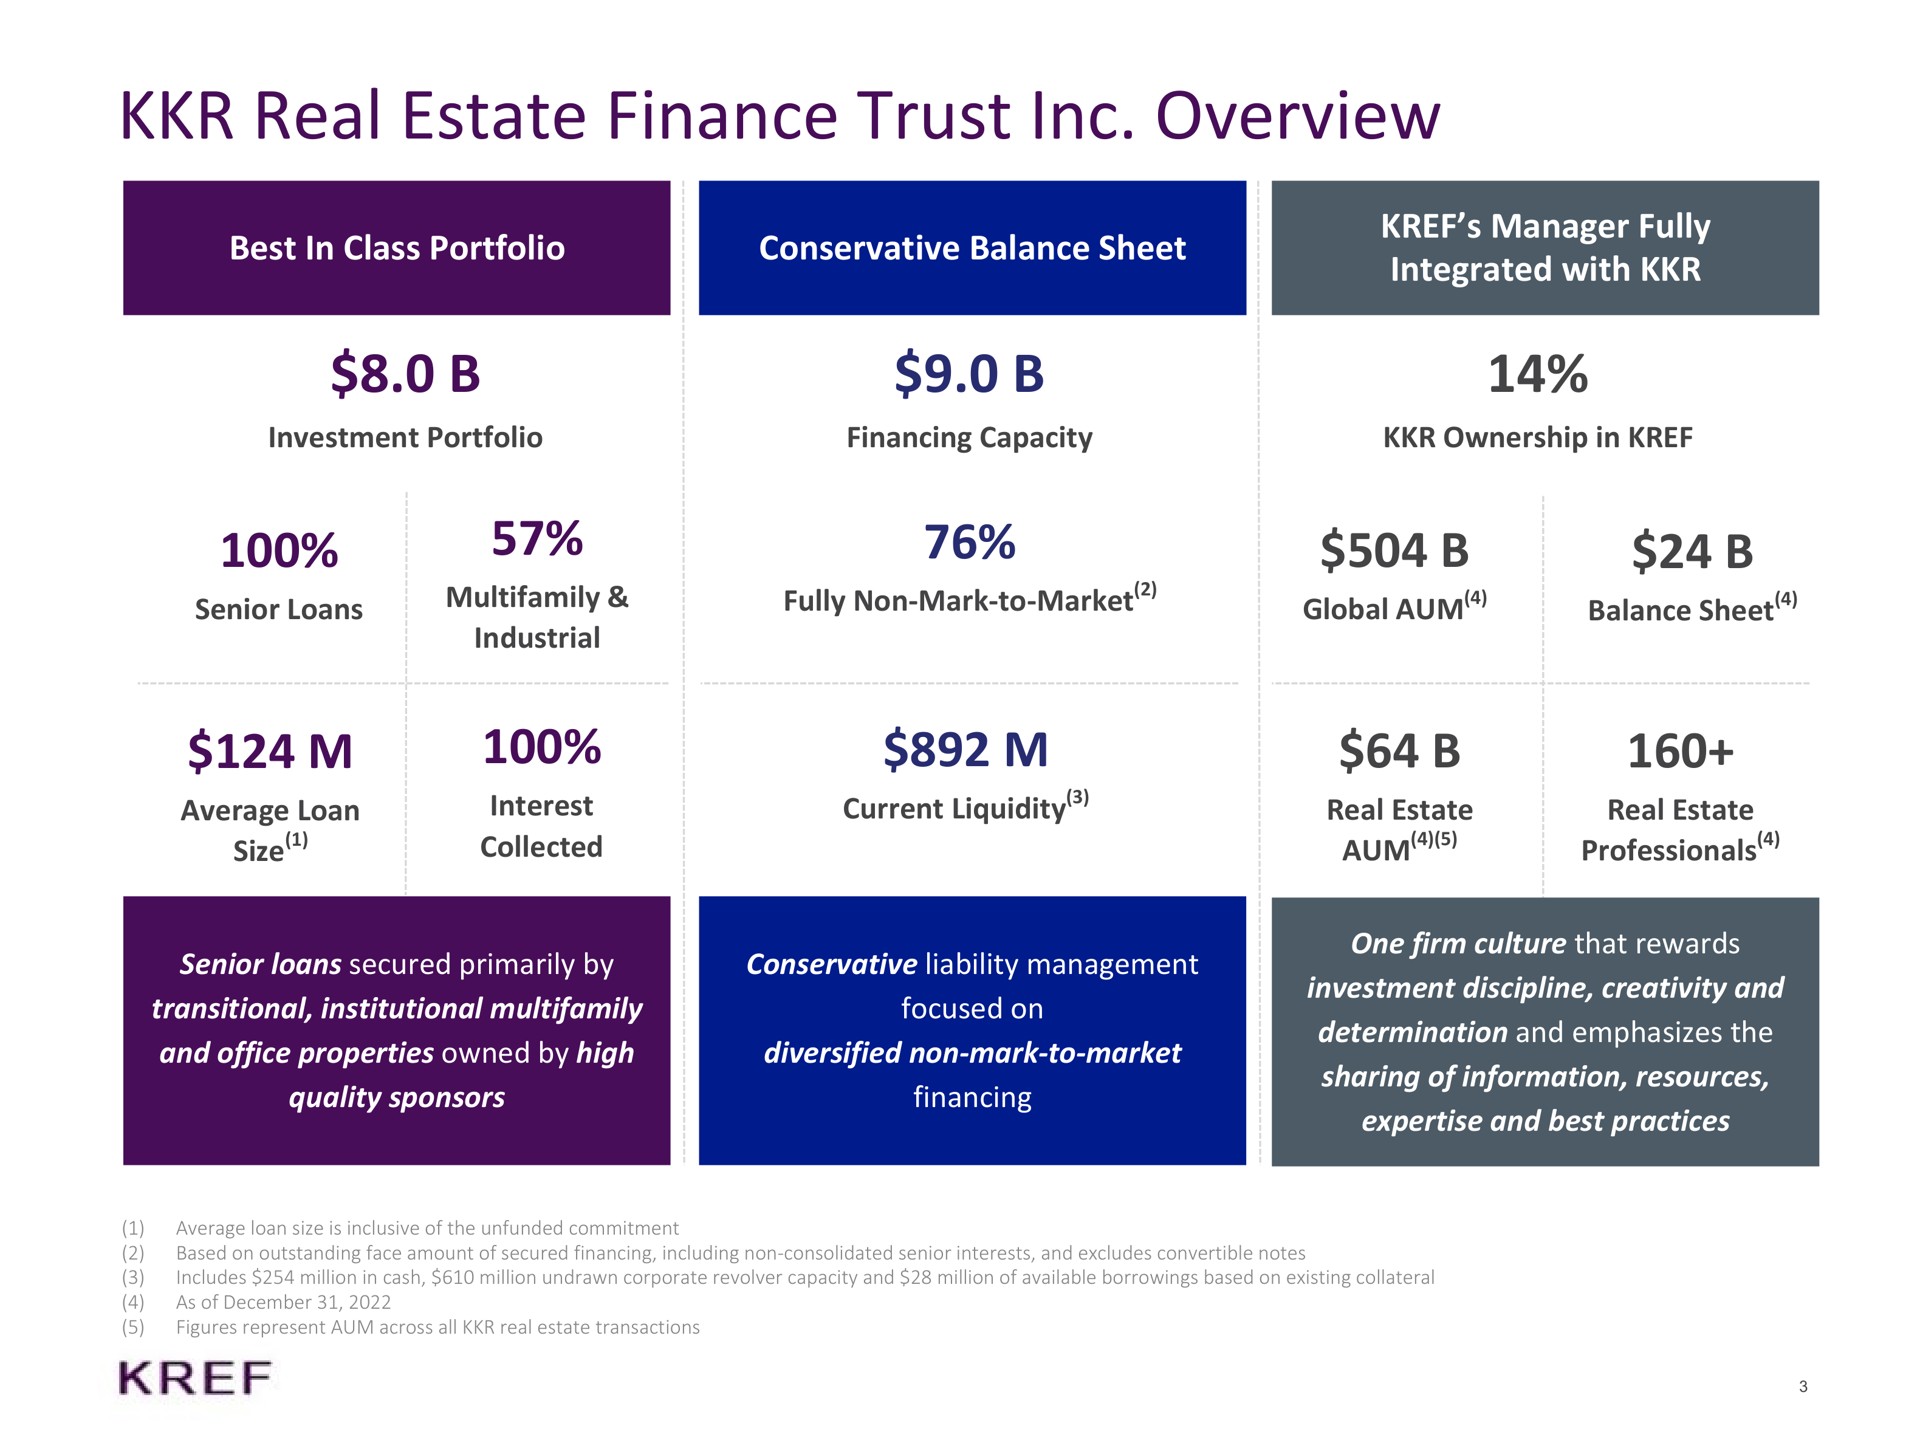 real estate finance trust overview best in class portfolio conservative balance sheet investment portfolio financing capacity manager fully integrated with ownership in fully non mark to market global aum balance sheet senior loans industrial average loan size interest collected current liquidity senior loans secured primarily by transitional institutional and office properties owned by high quality sponsors conservative liability management focused on diversified non mark to market financing real estate real estate professionals one firm culture that rewards investment discipline creativity and determination and emphasizes the sharing of information resources and best practices ale a tes me a | KKR Real Estate Finance Trust